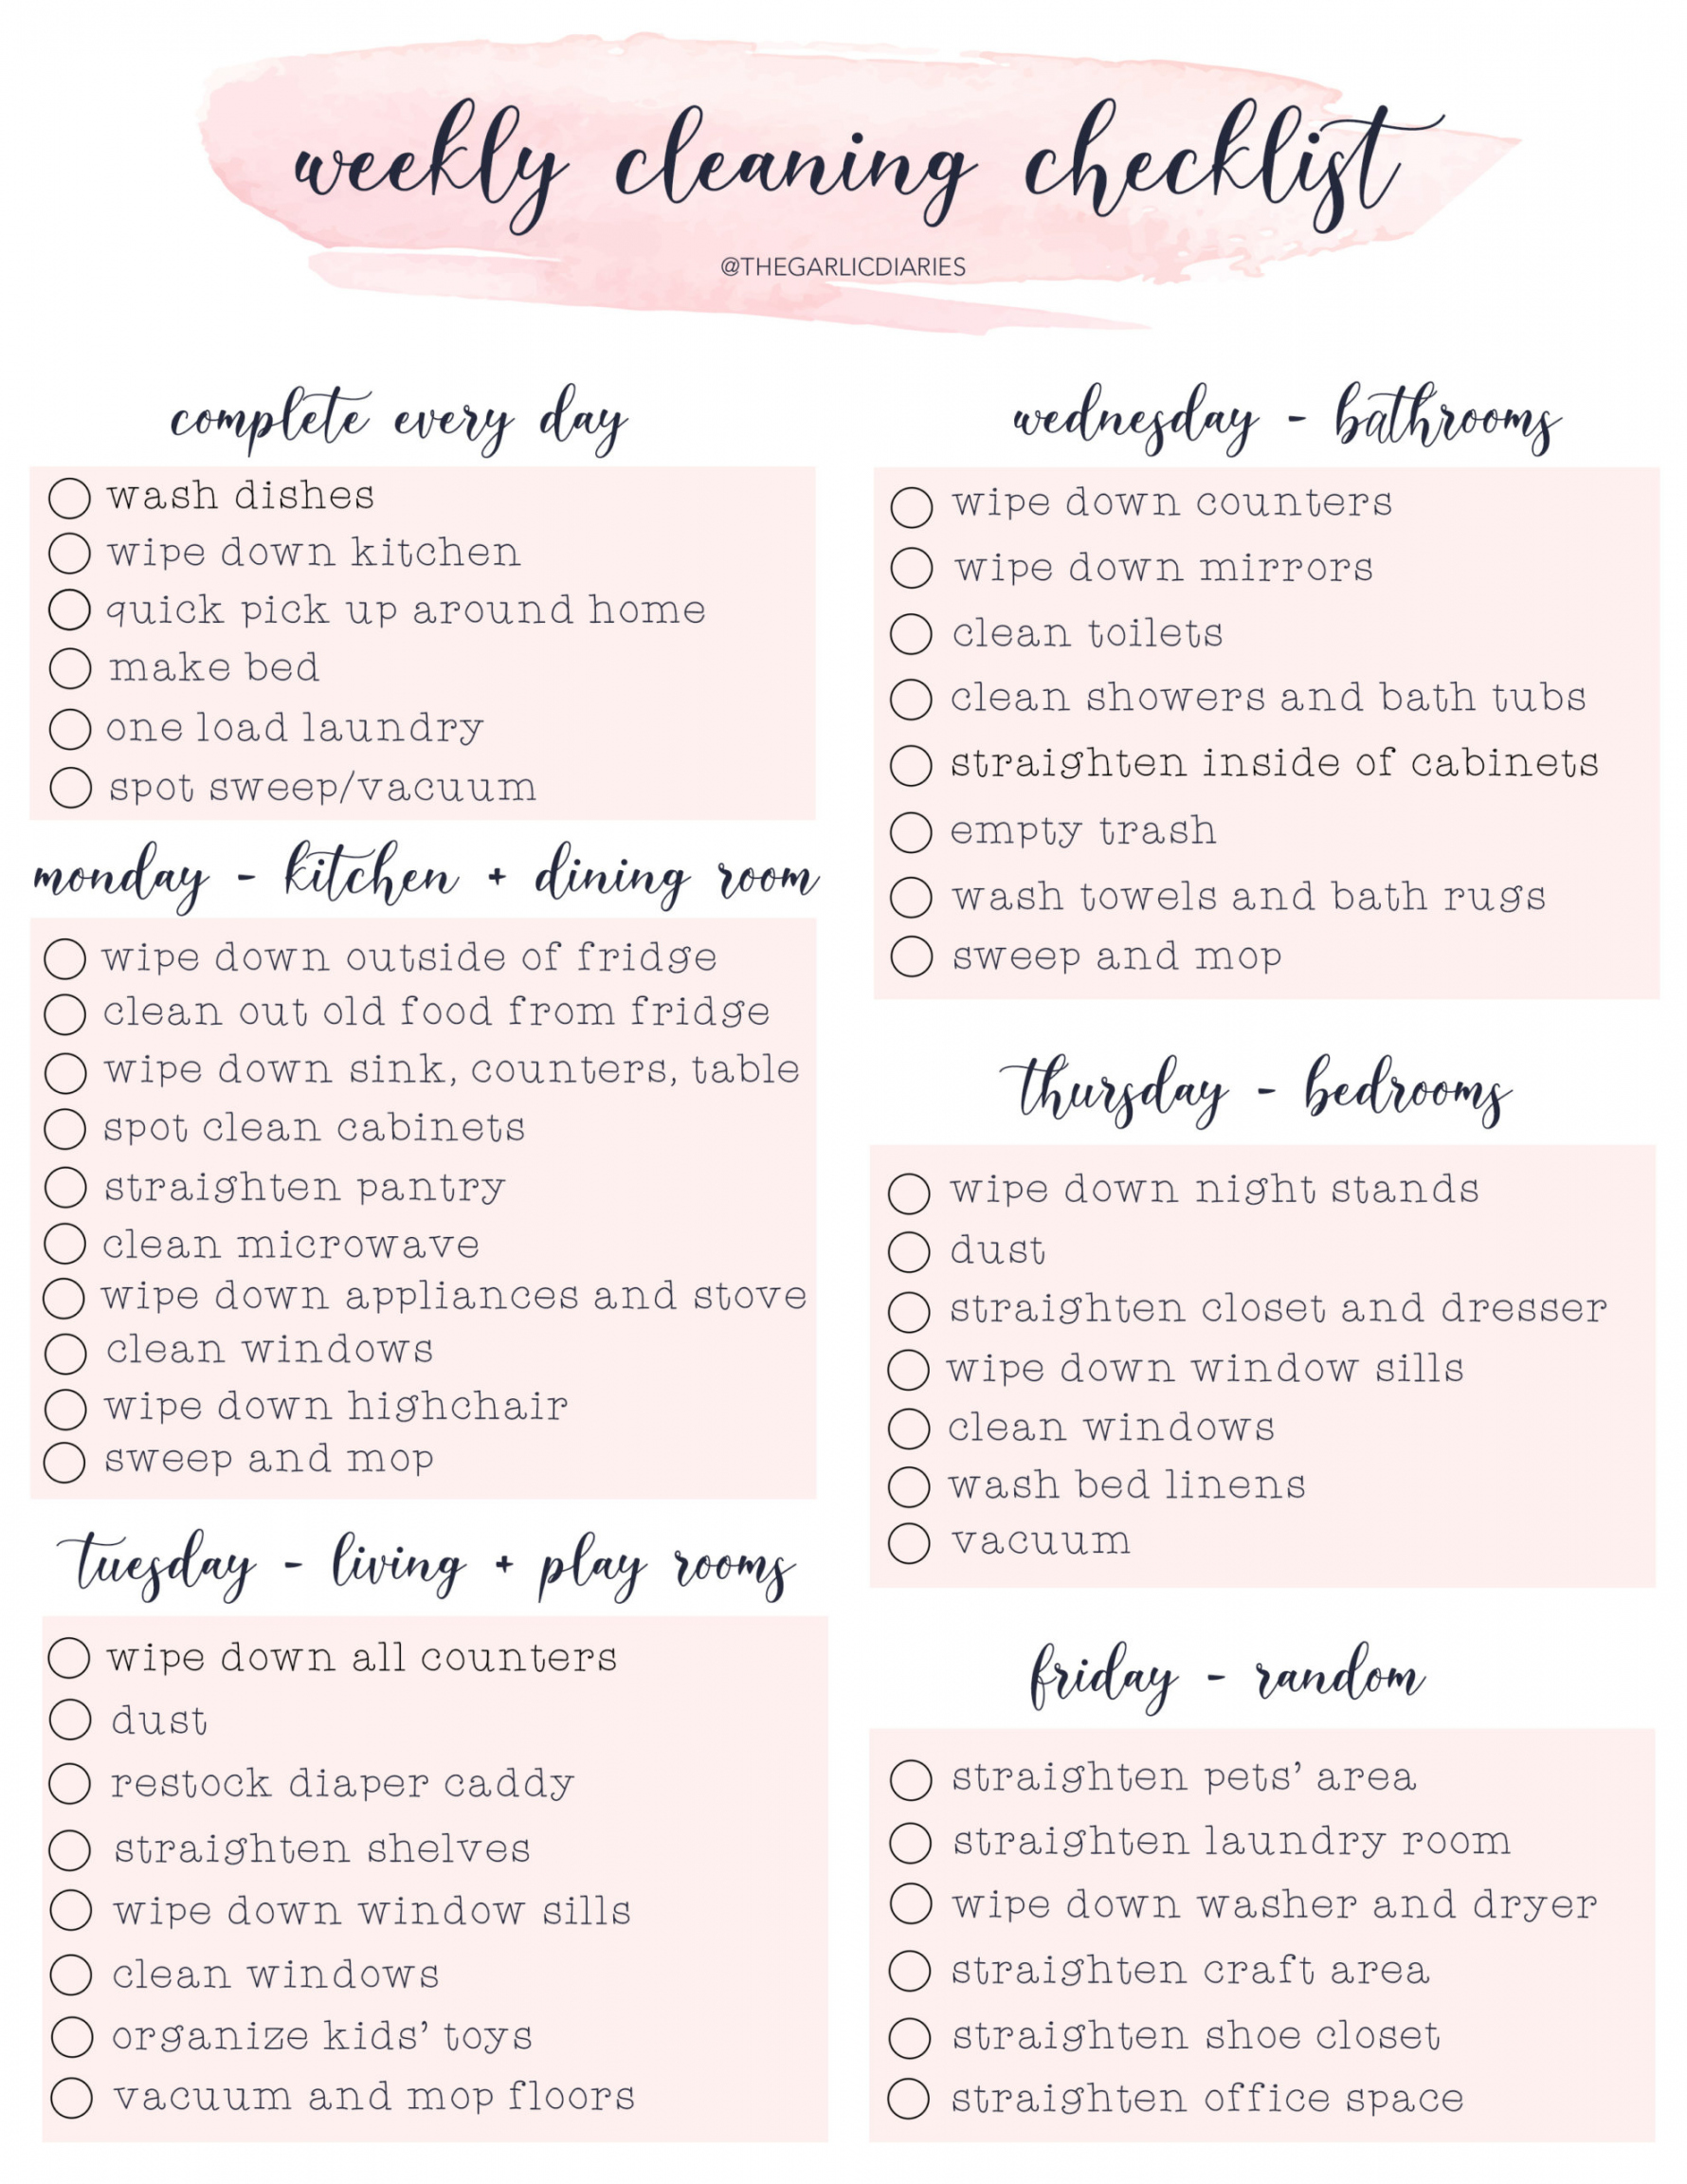 Weekly Cleaning Checklist (with free downloadable) - FREE Printables - Free Cleaning Schedule Printable